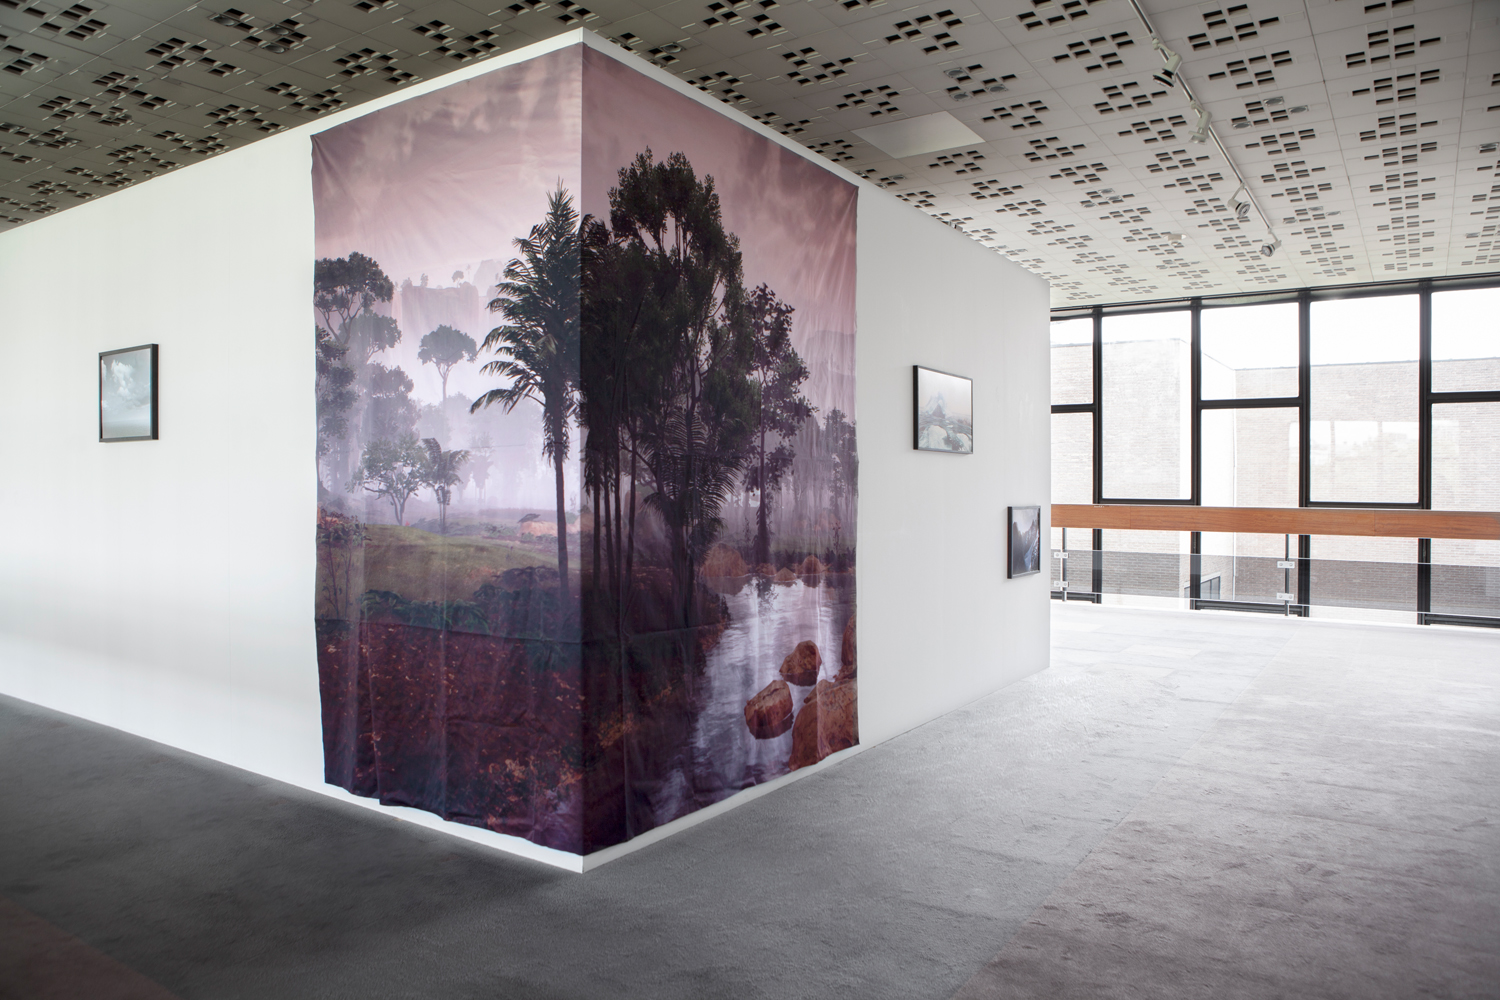 Rob Wetzer, ‘Lost Worlds’, 2017, 7 inkjet print op Hahnemuhle, aluminium in zwarte lijst, variable sizes, a print on bannervinyl, videoprojection , Courtesy of the Artist